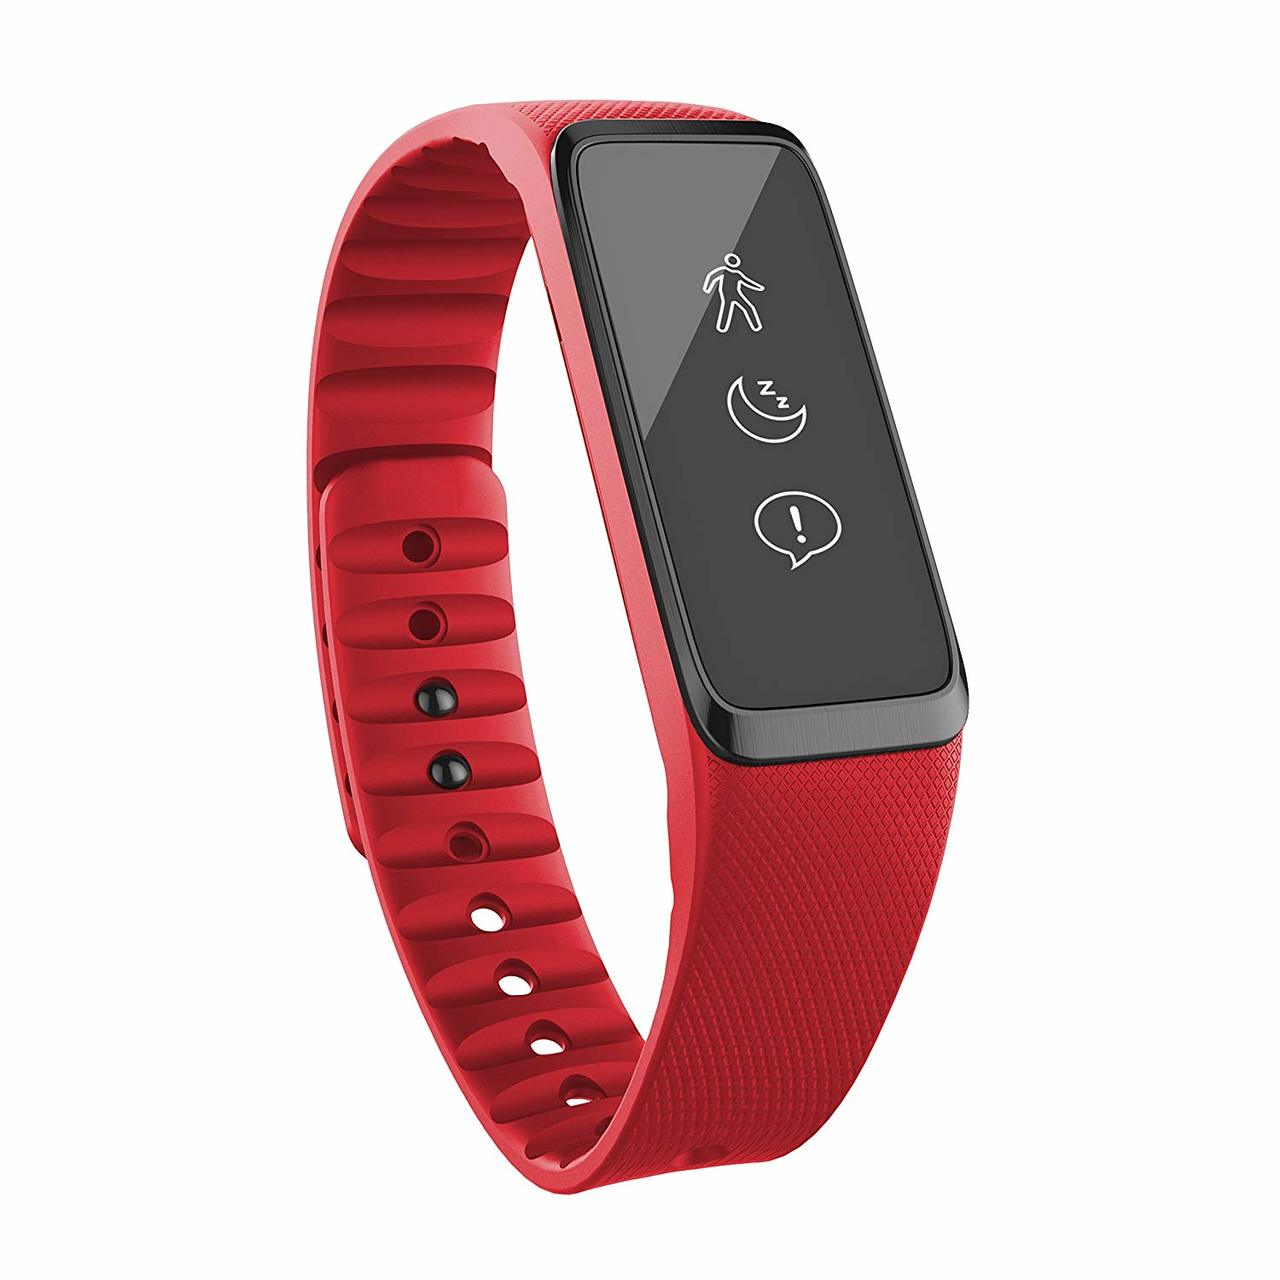 Striiv Fusion Activity Tracker Fitness and Sleep Tracking Smartwatch, 3 Color Bands Included (Black, Red, Blue)